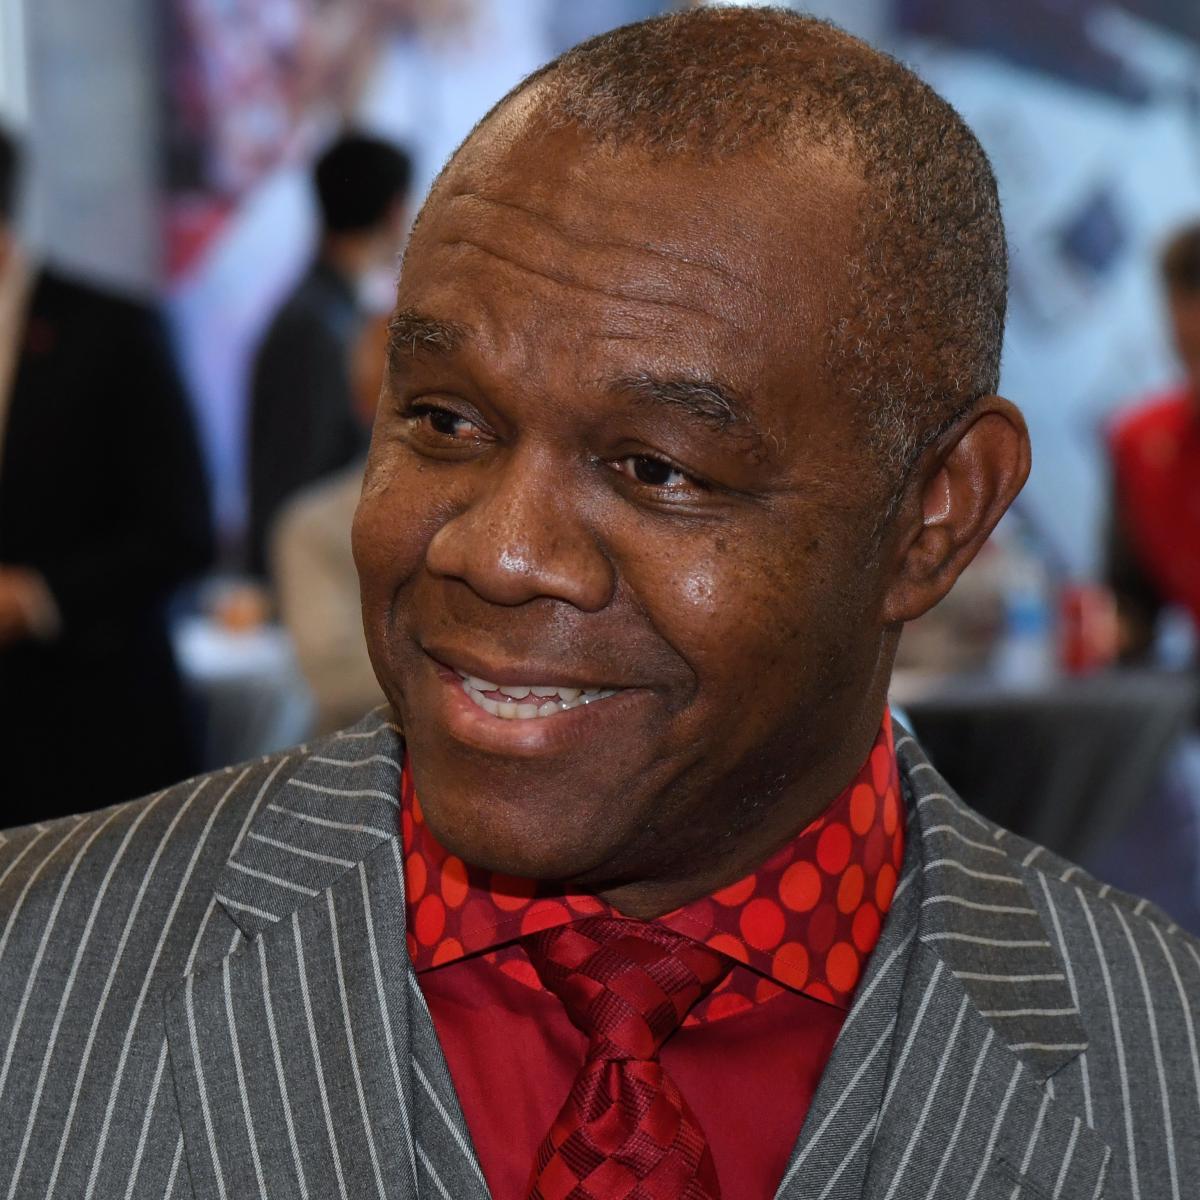 NFL legend Randall Cunningham looks unrecognizable as pastor in